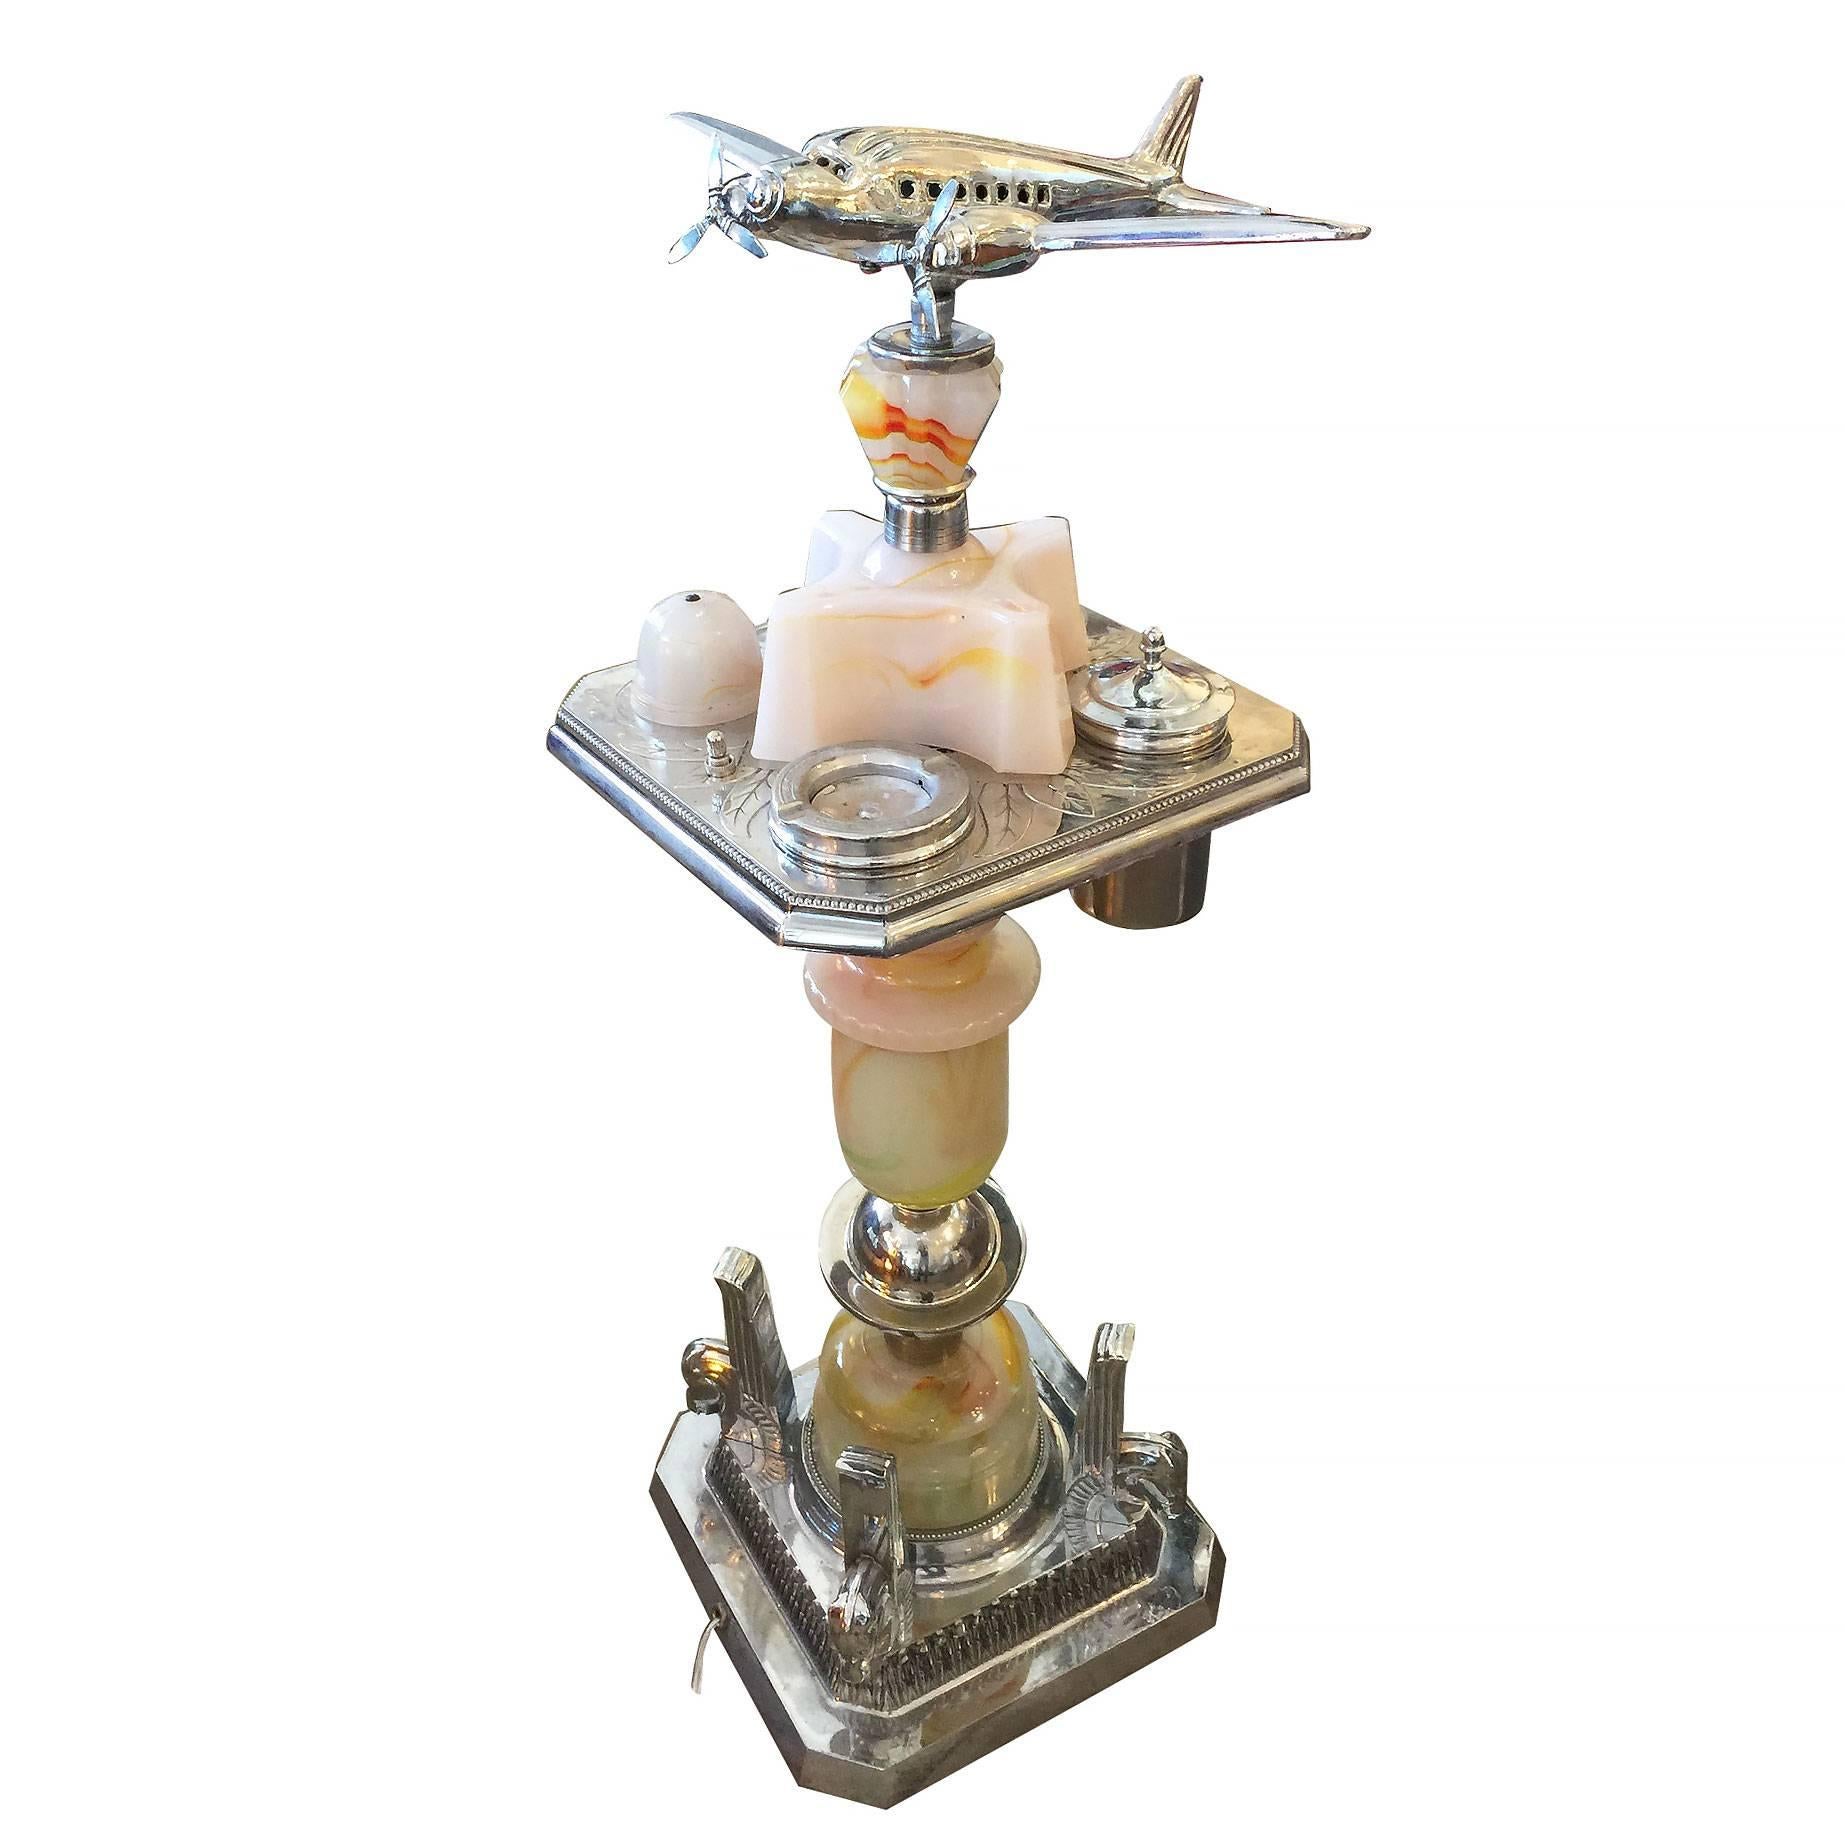 Brass Art Deco ashtray stand featuring a decorative light up airplane on top with a glass light up bass on the bottom. 

The stand comes with a built-in light, two ashtrays and tobacco canister.